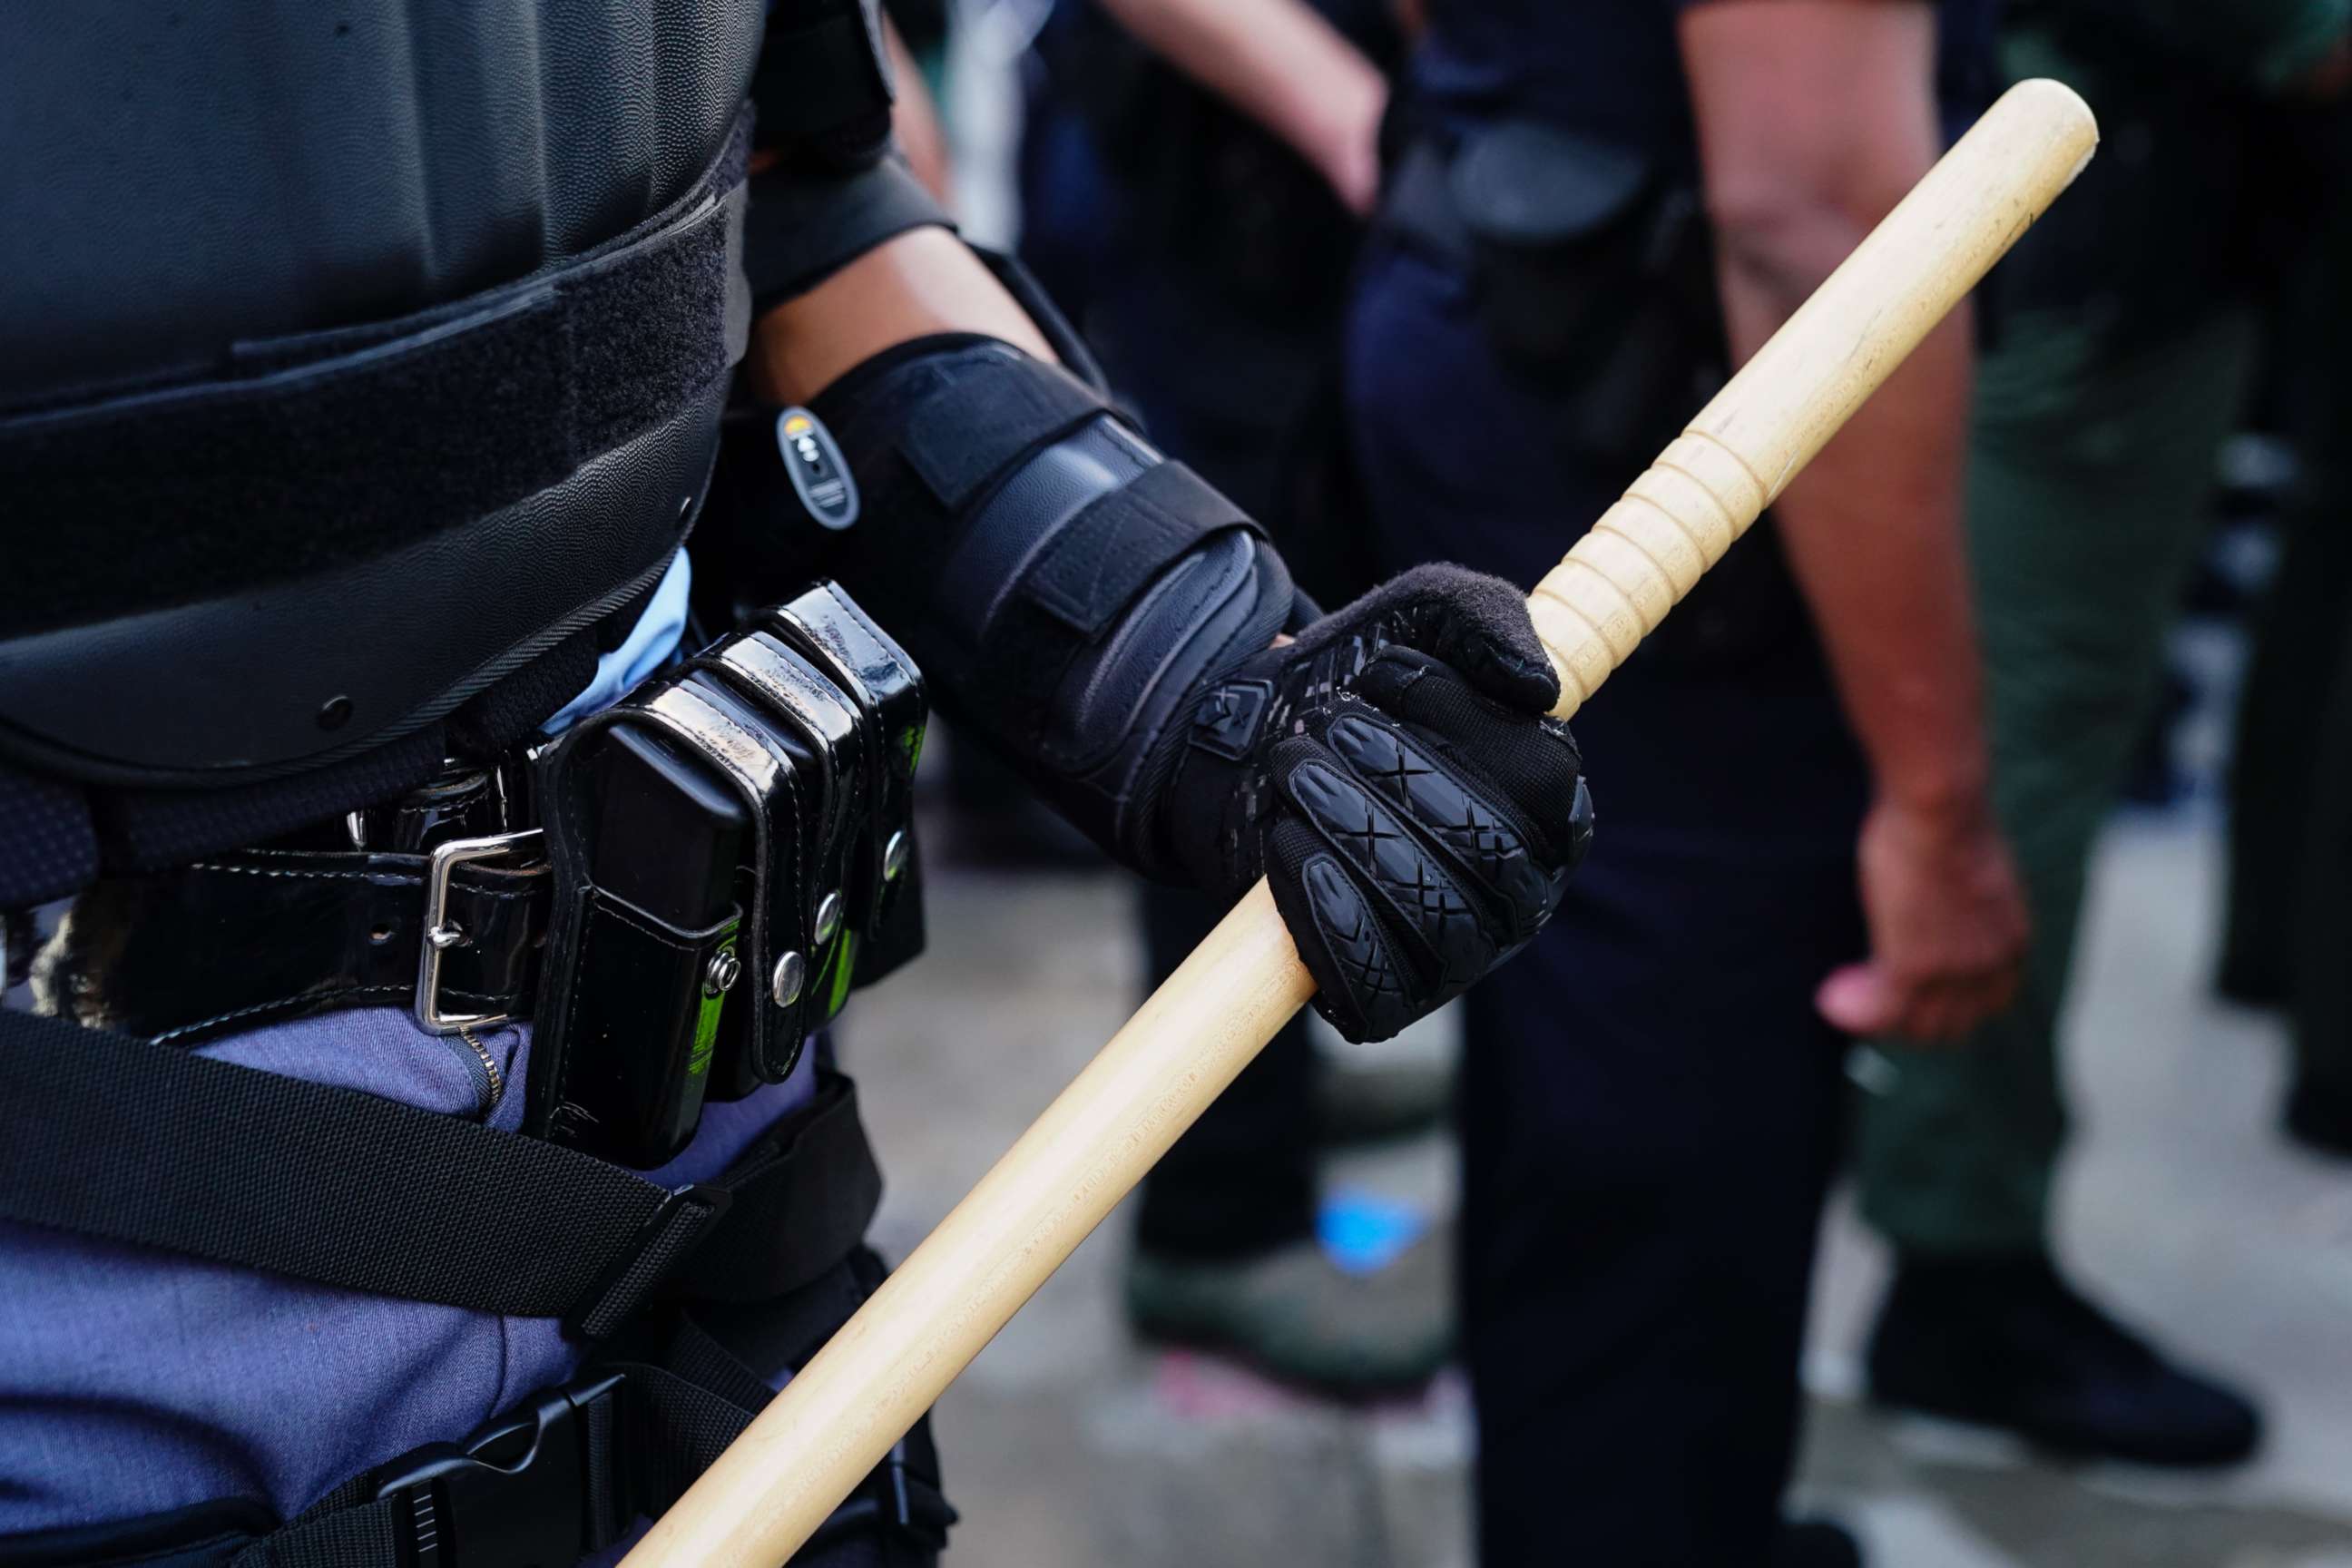 PHOTO: A police officer holds a baton during a protest over the Minneapolis death of George Floyd, May 29, 2020, in Atlanta.